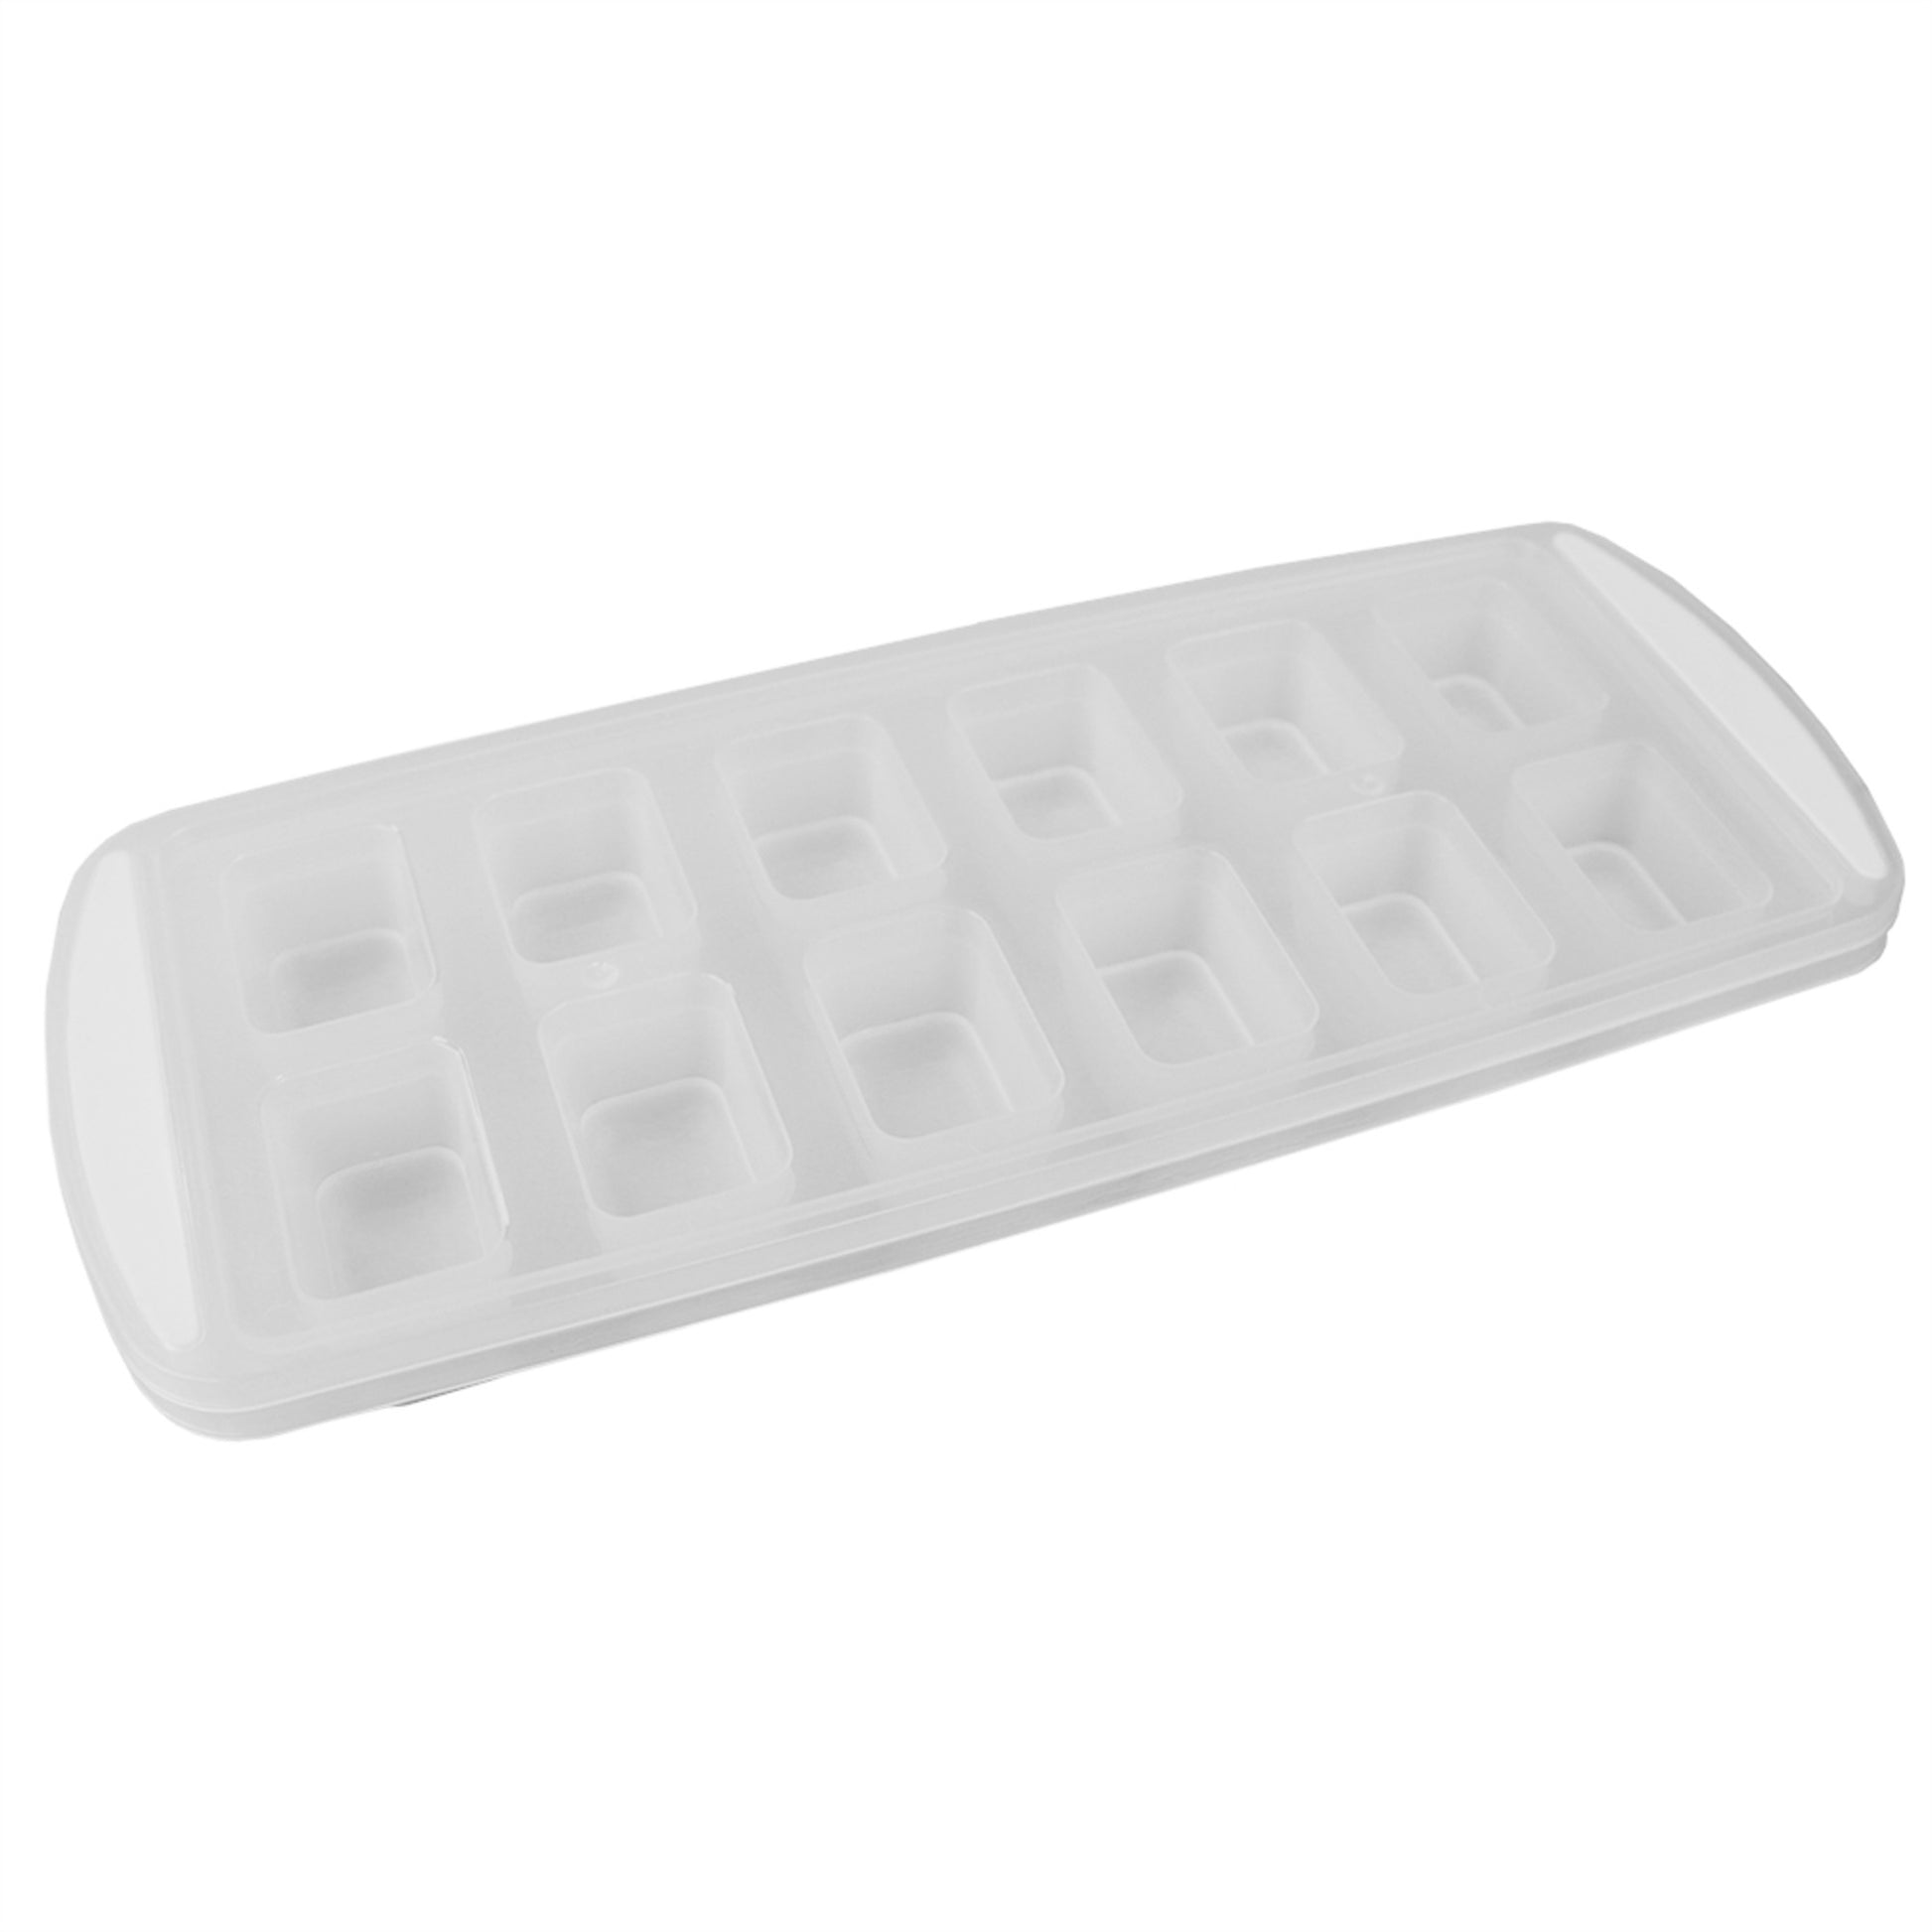 Home Basics Pop-Out 12 Compartment Rectangle Plastic Ice Cube Tray, White - White